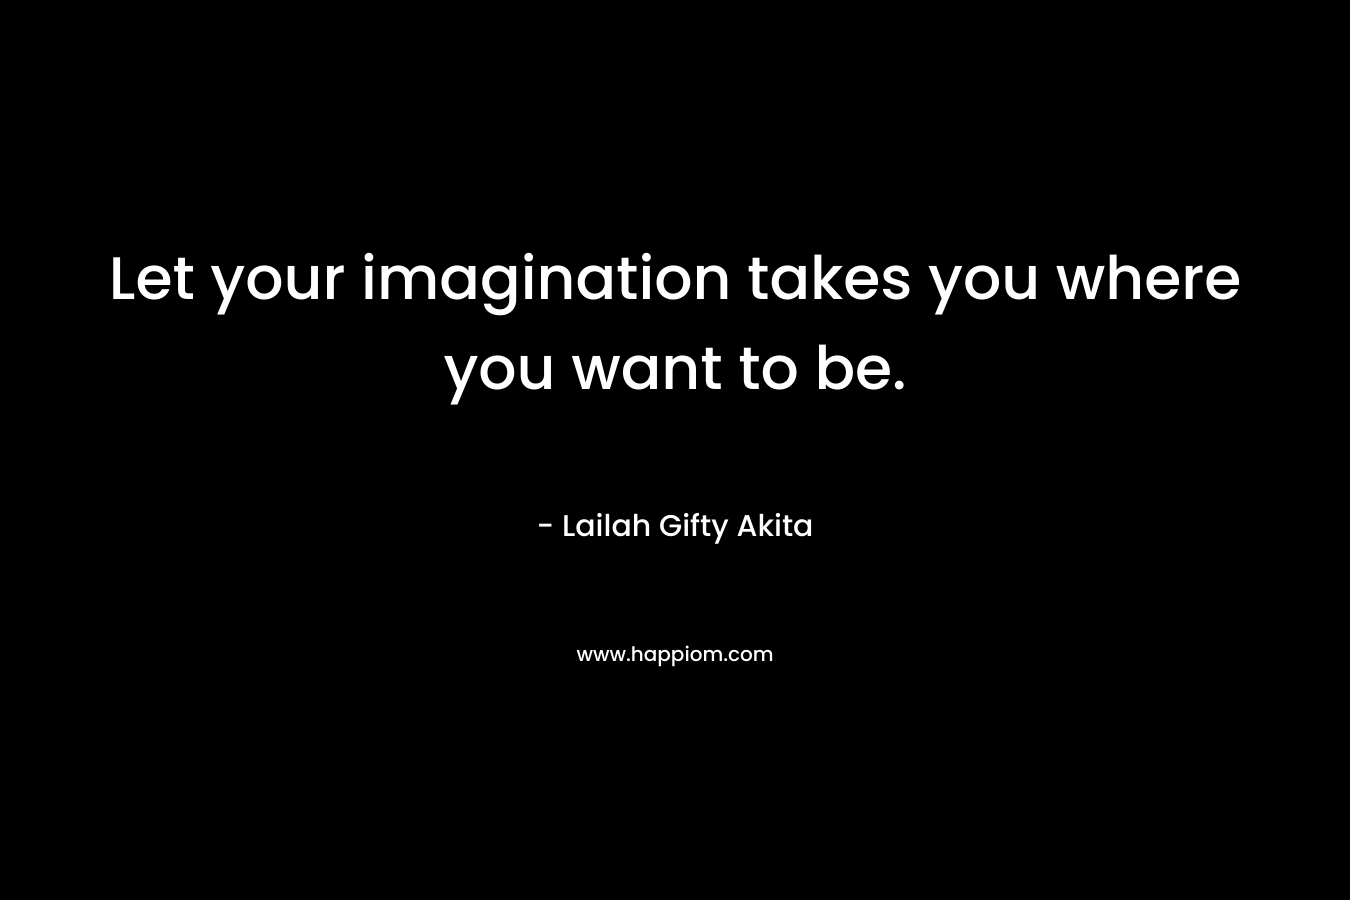 Let your imagination takes you where you want to be.